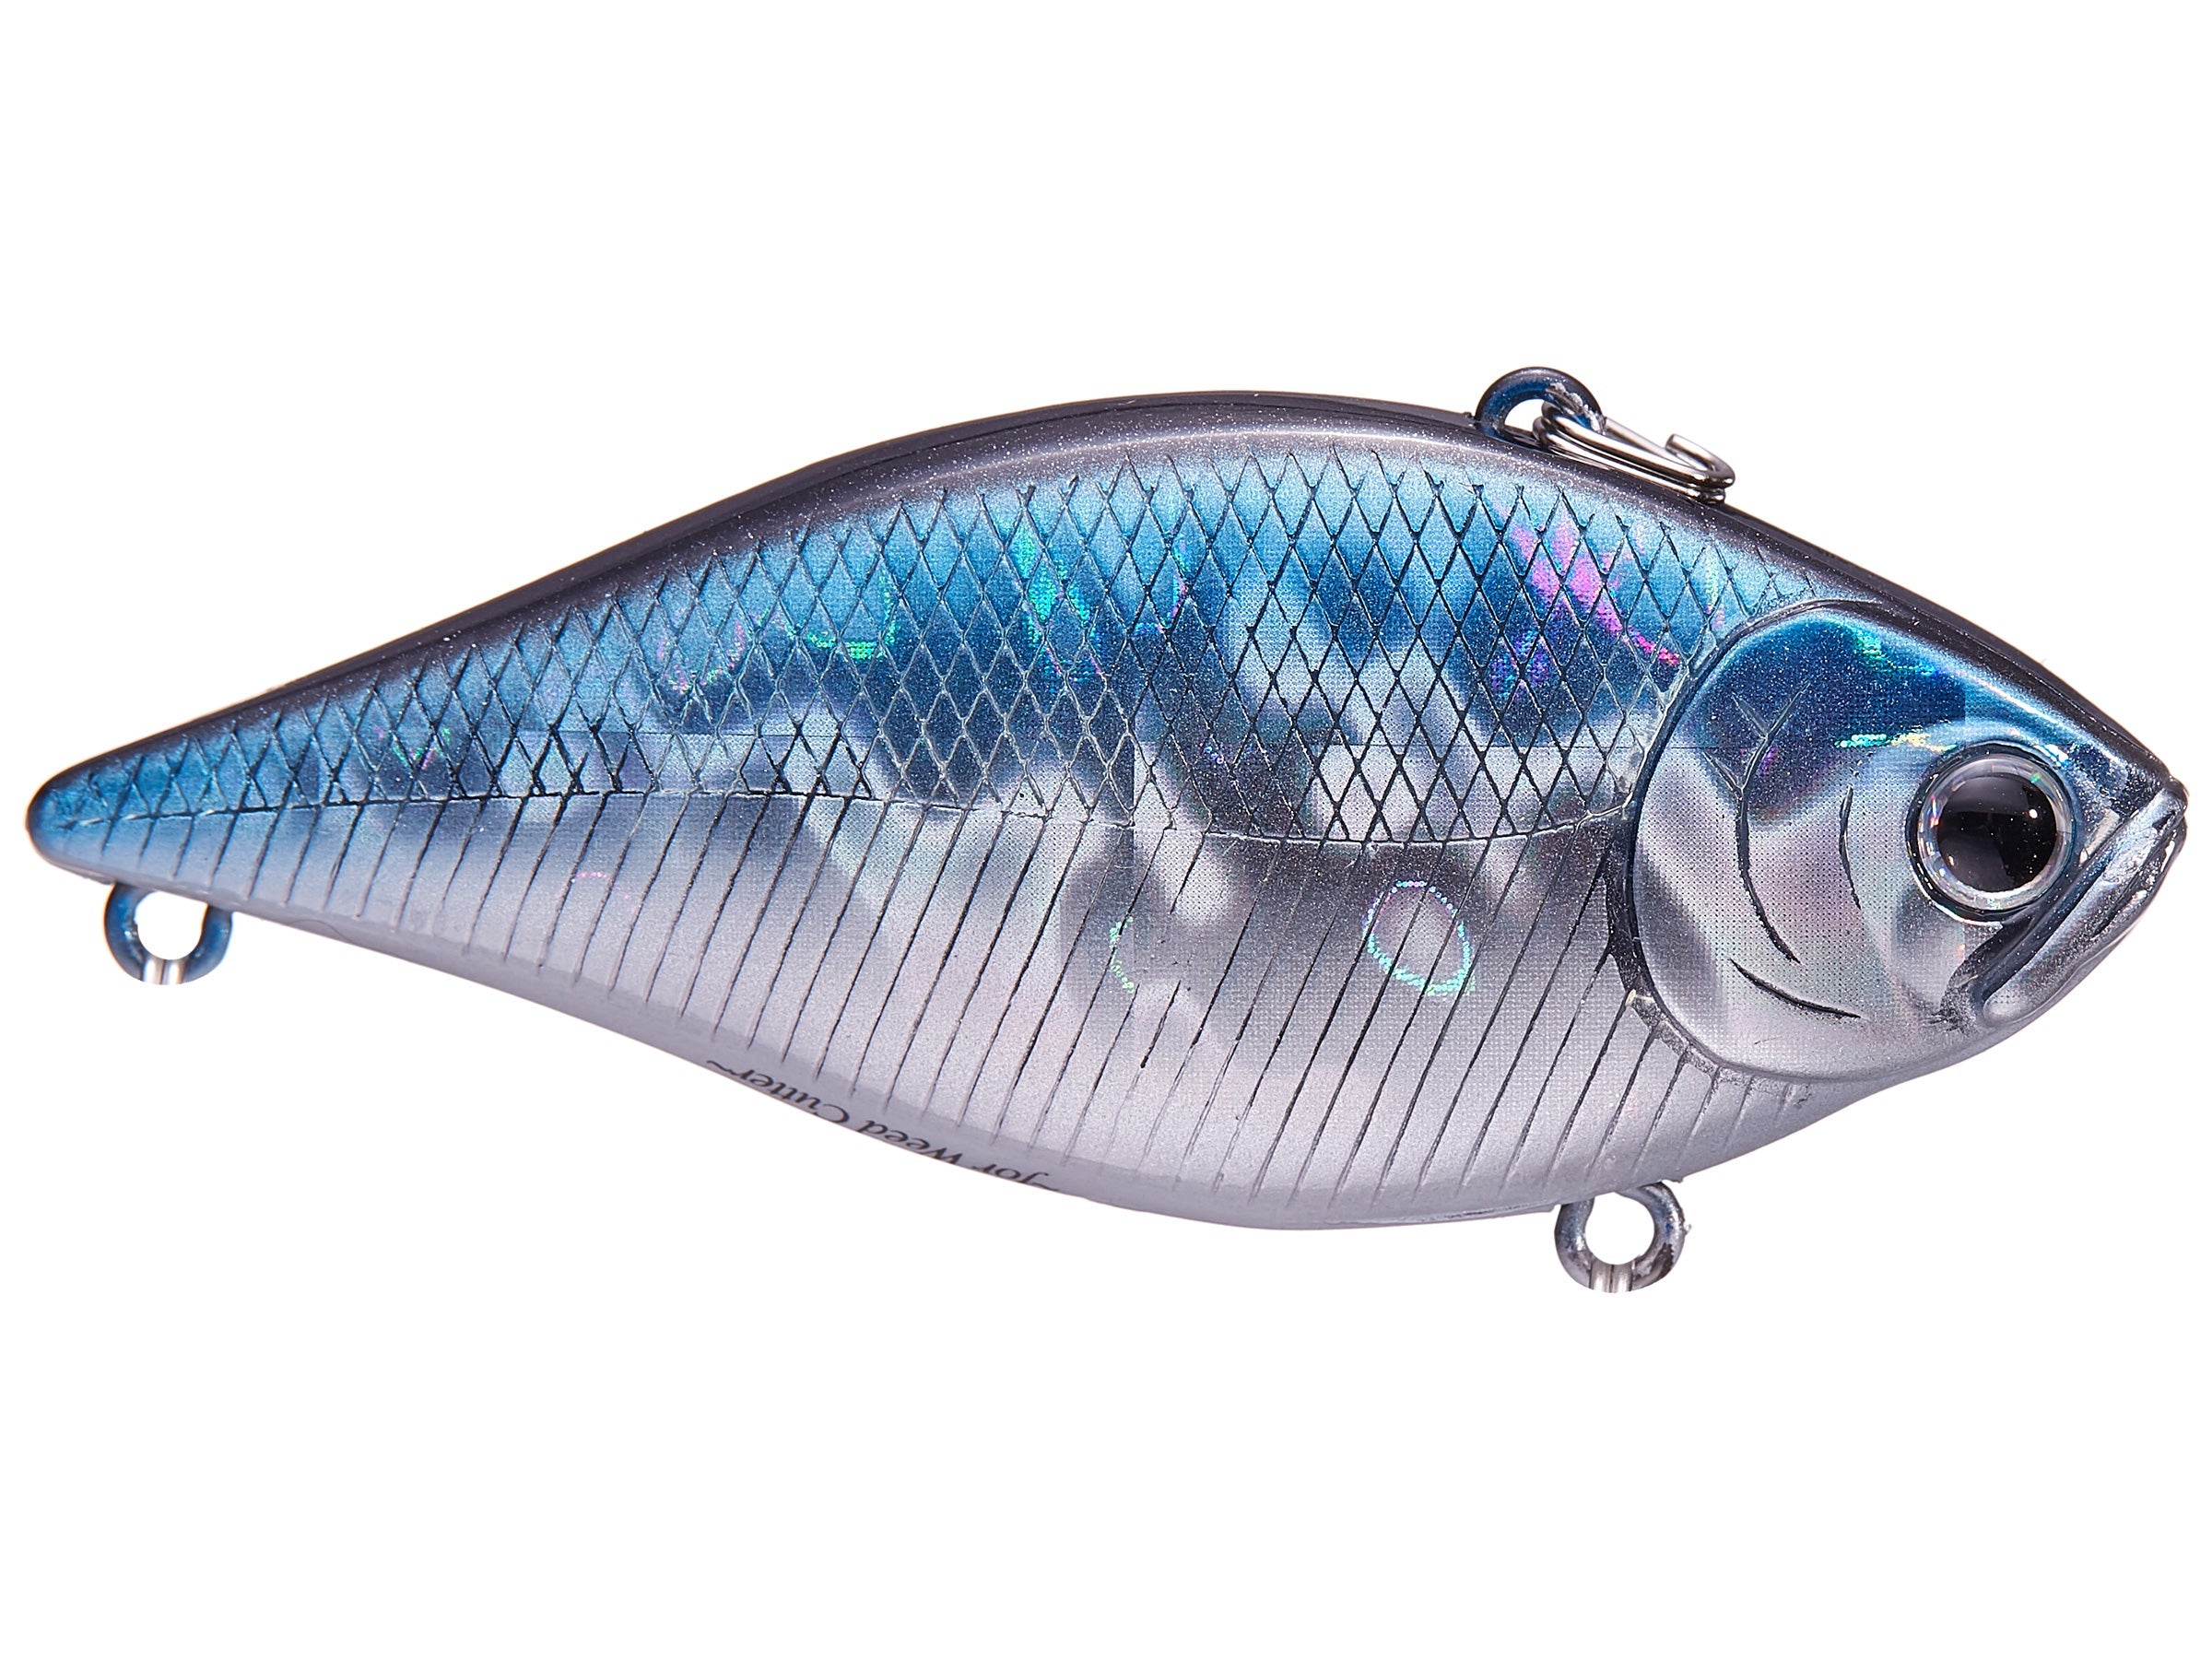 Lucky Craft LVR D-7 S – Clearlake Bait & Tackle